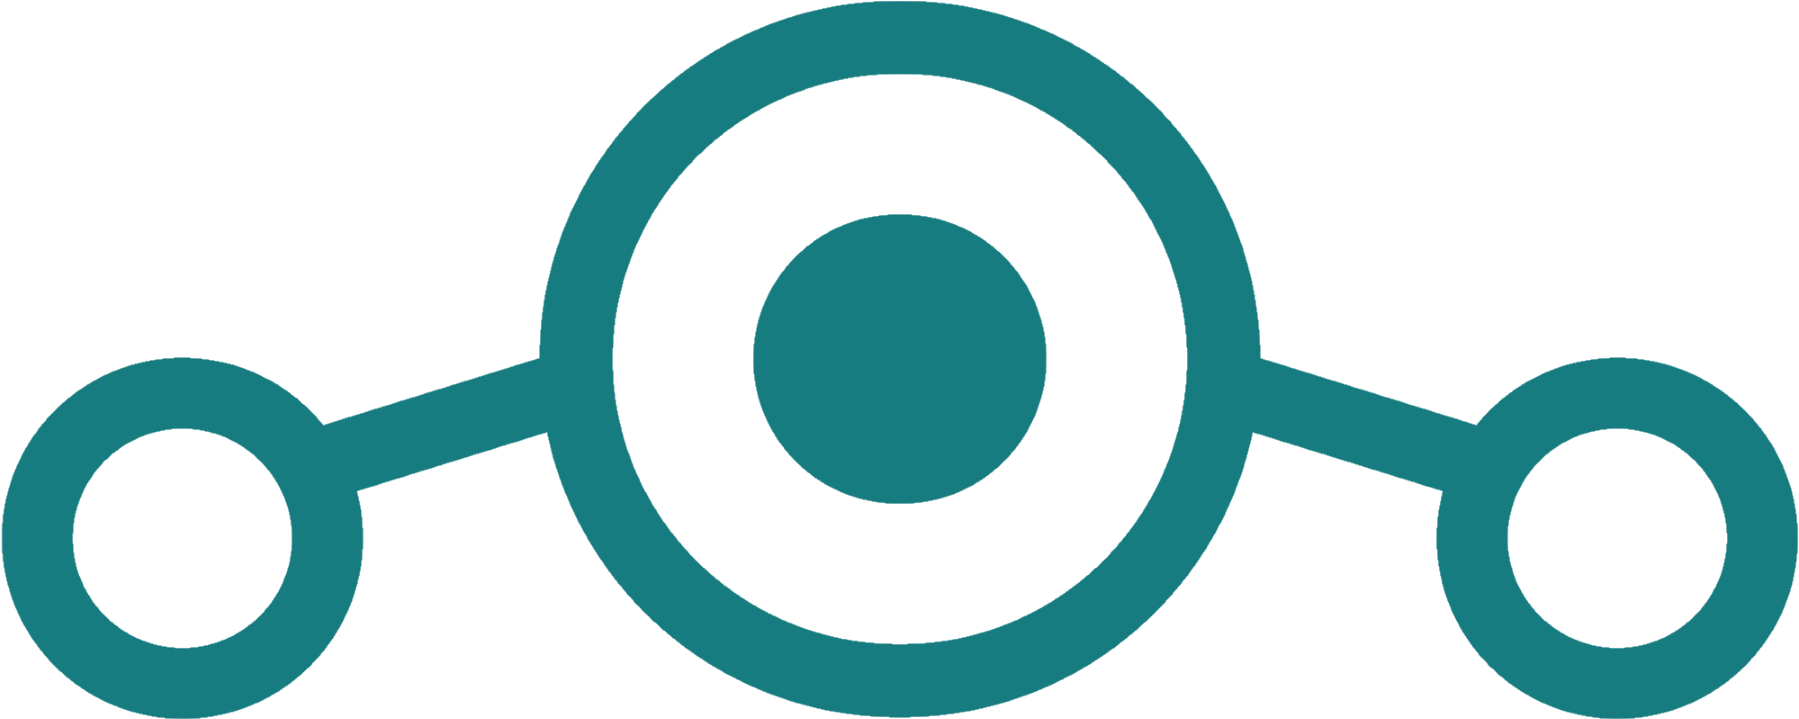 File Lineage Os Logo Png Wikimedia Commons Rh Commons - Lineage Os Logo (2000x1000)